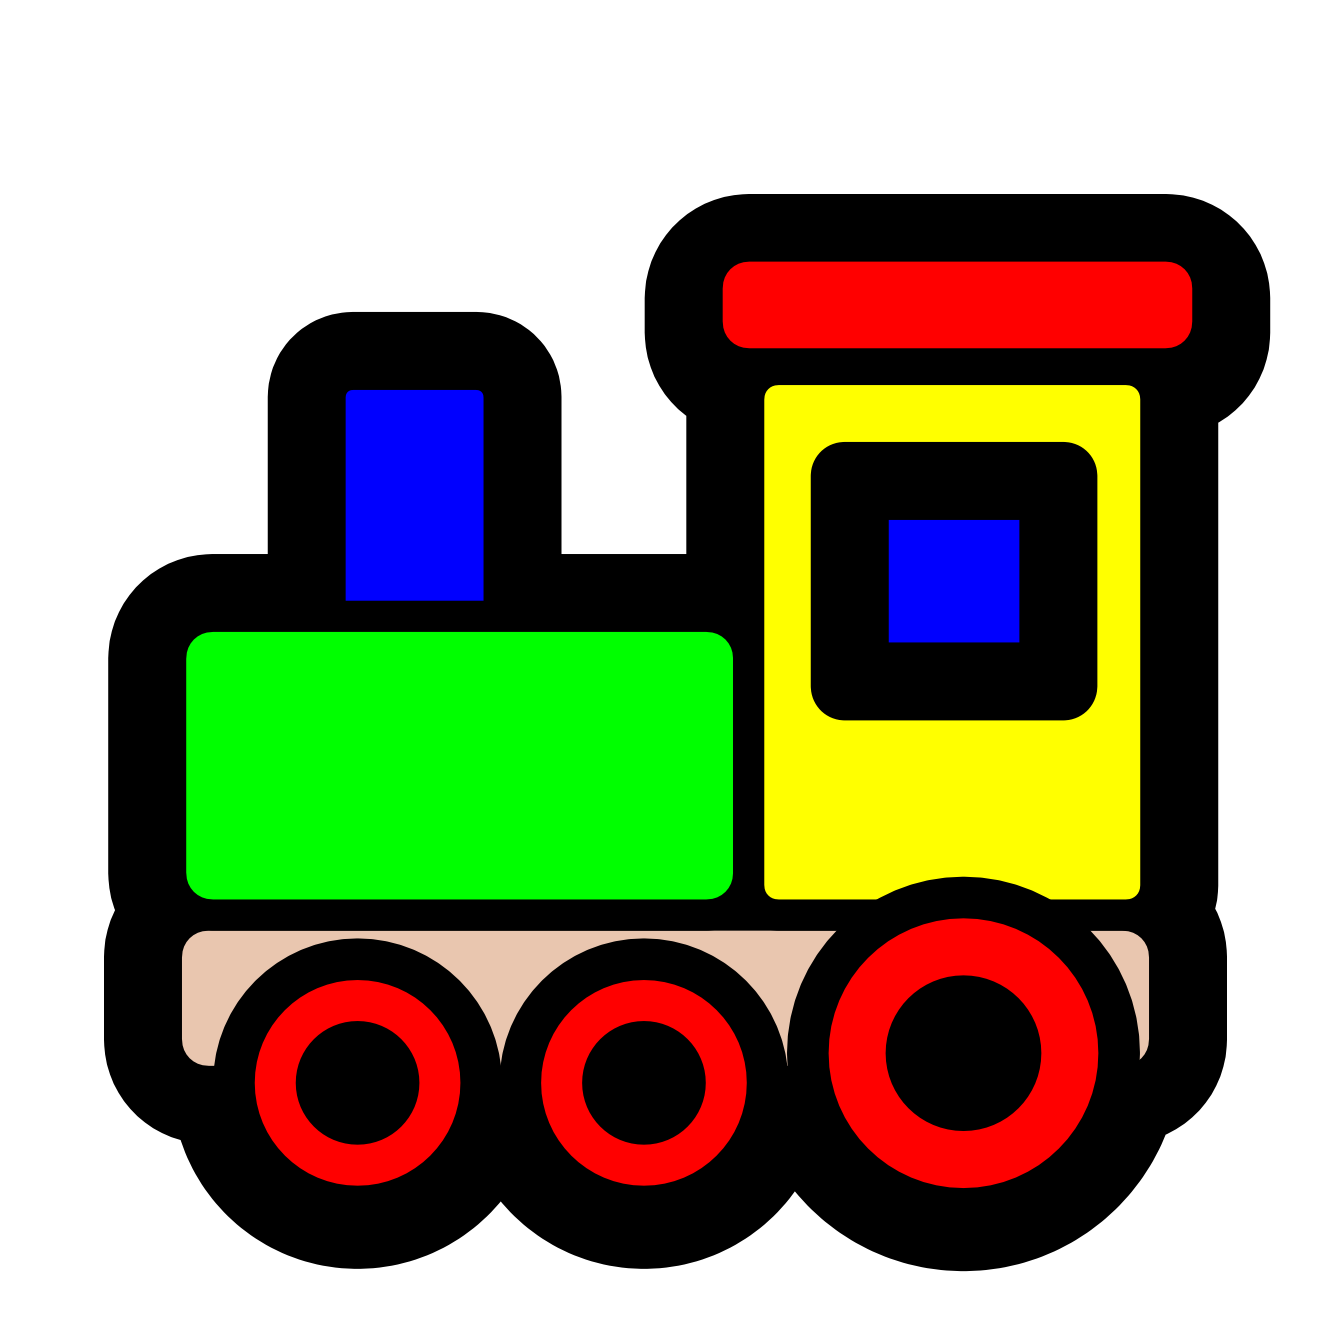 Toy trains image group. Wagon clipart cartoon